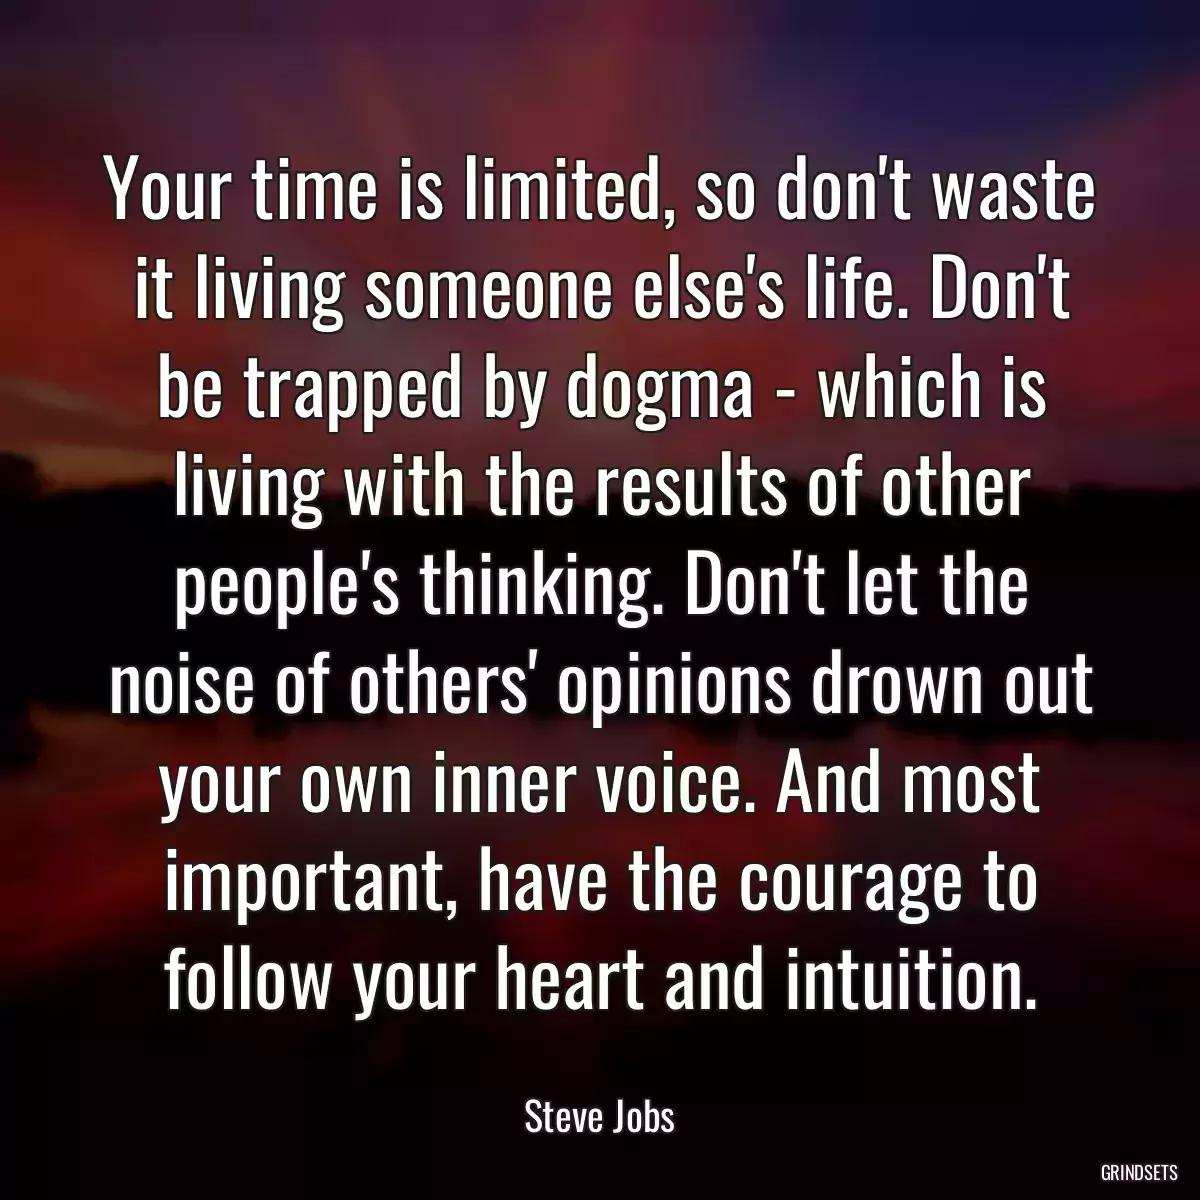 Your time is limited, so don\'t waste it living someone else\'s life. Don\'t be trapped by dogma - which is living with the results of other people\'s thinking. Don\'t let the noise of others\' opinions drown out your own inner voice. And most important, have the courage to follow your heart and intuition.